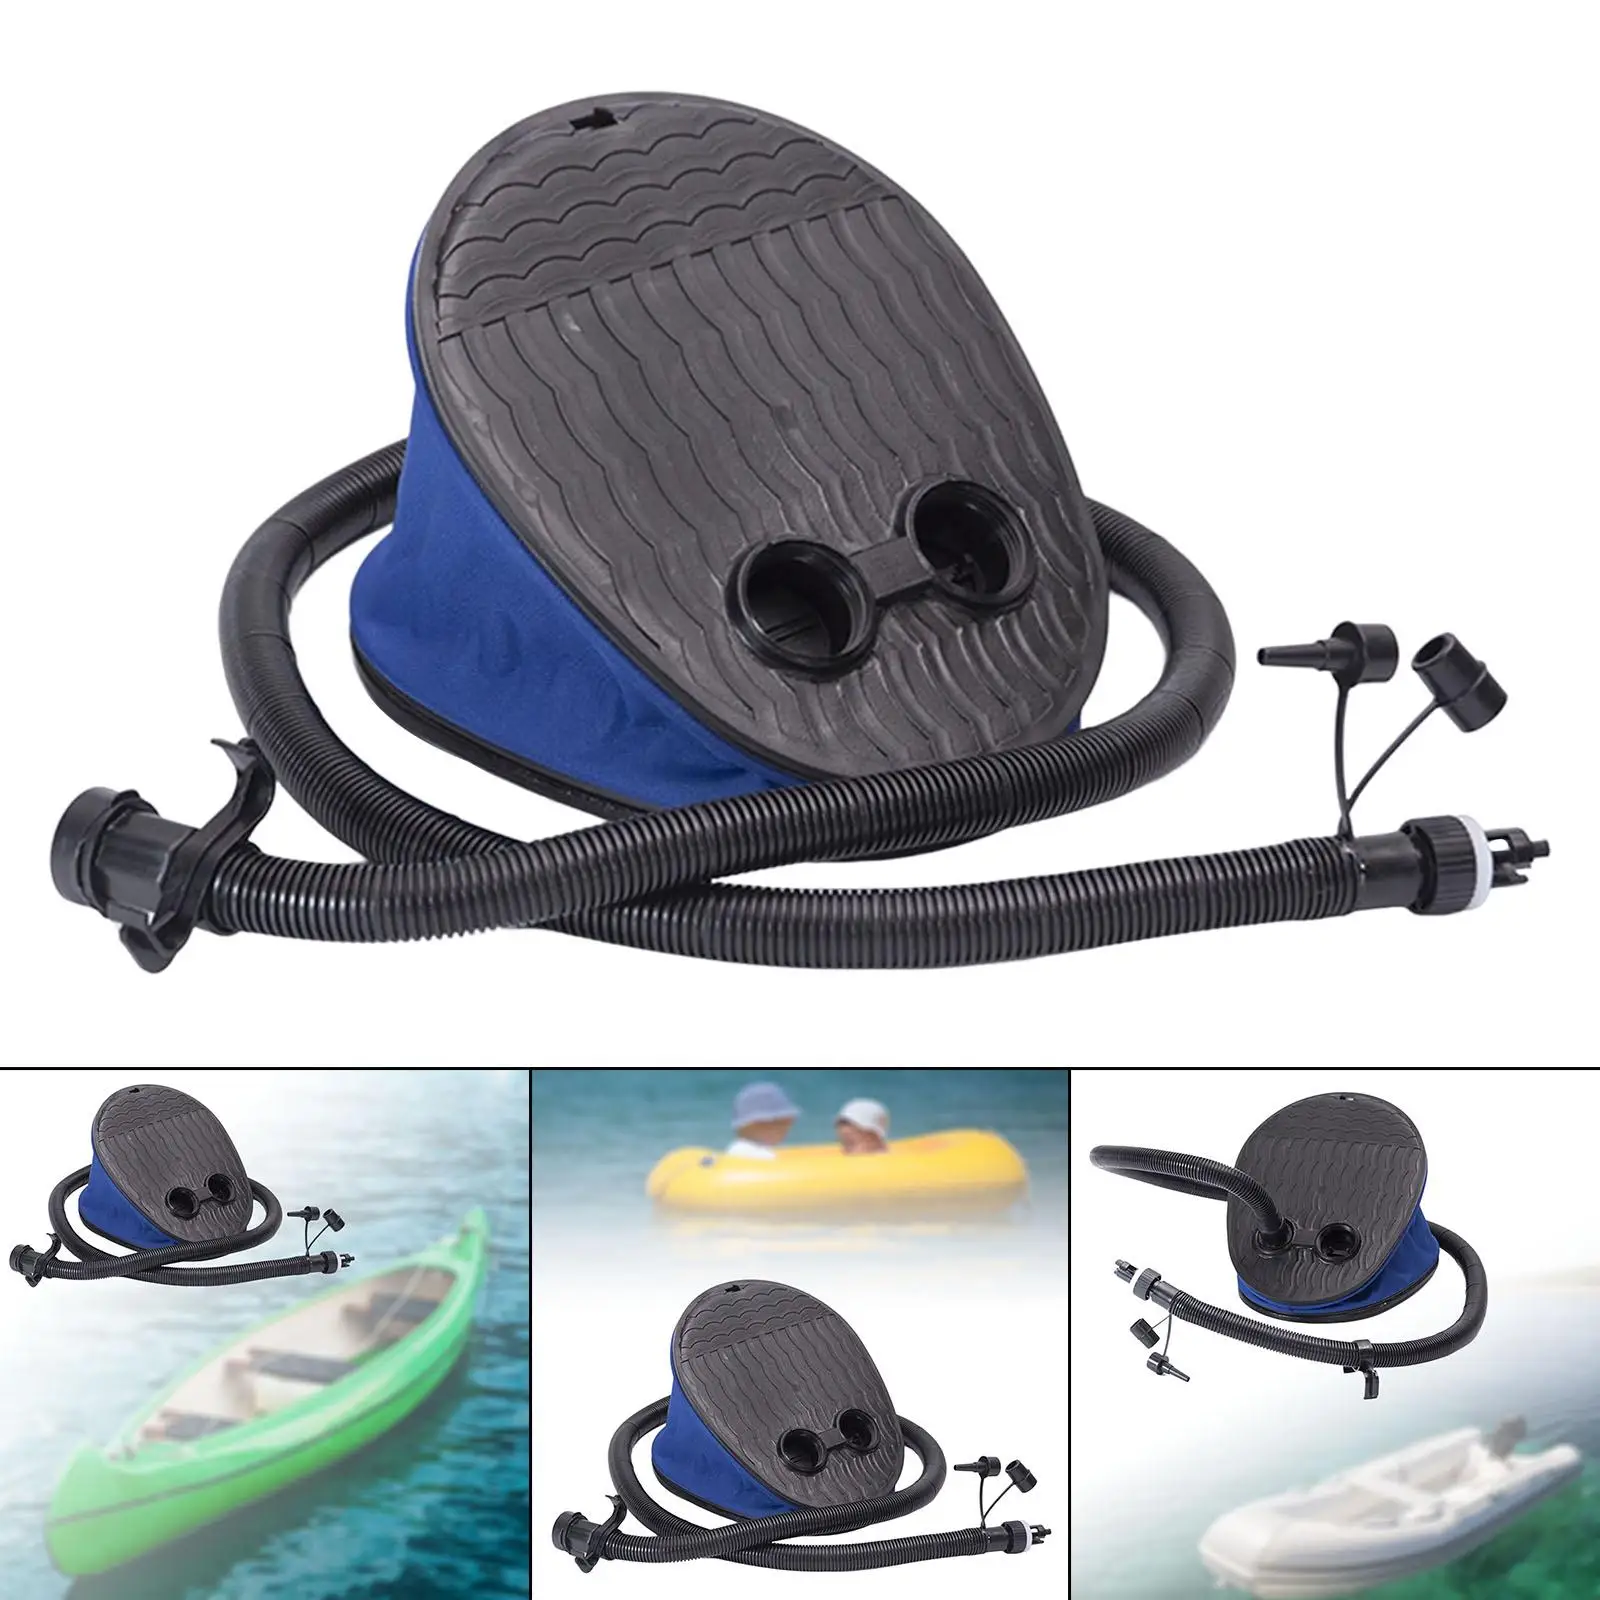 Bellows Air Pump W/ Hose Lightweight Foot Pump for Beach Inflatable Boat Toy